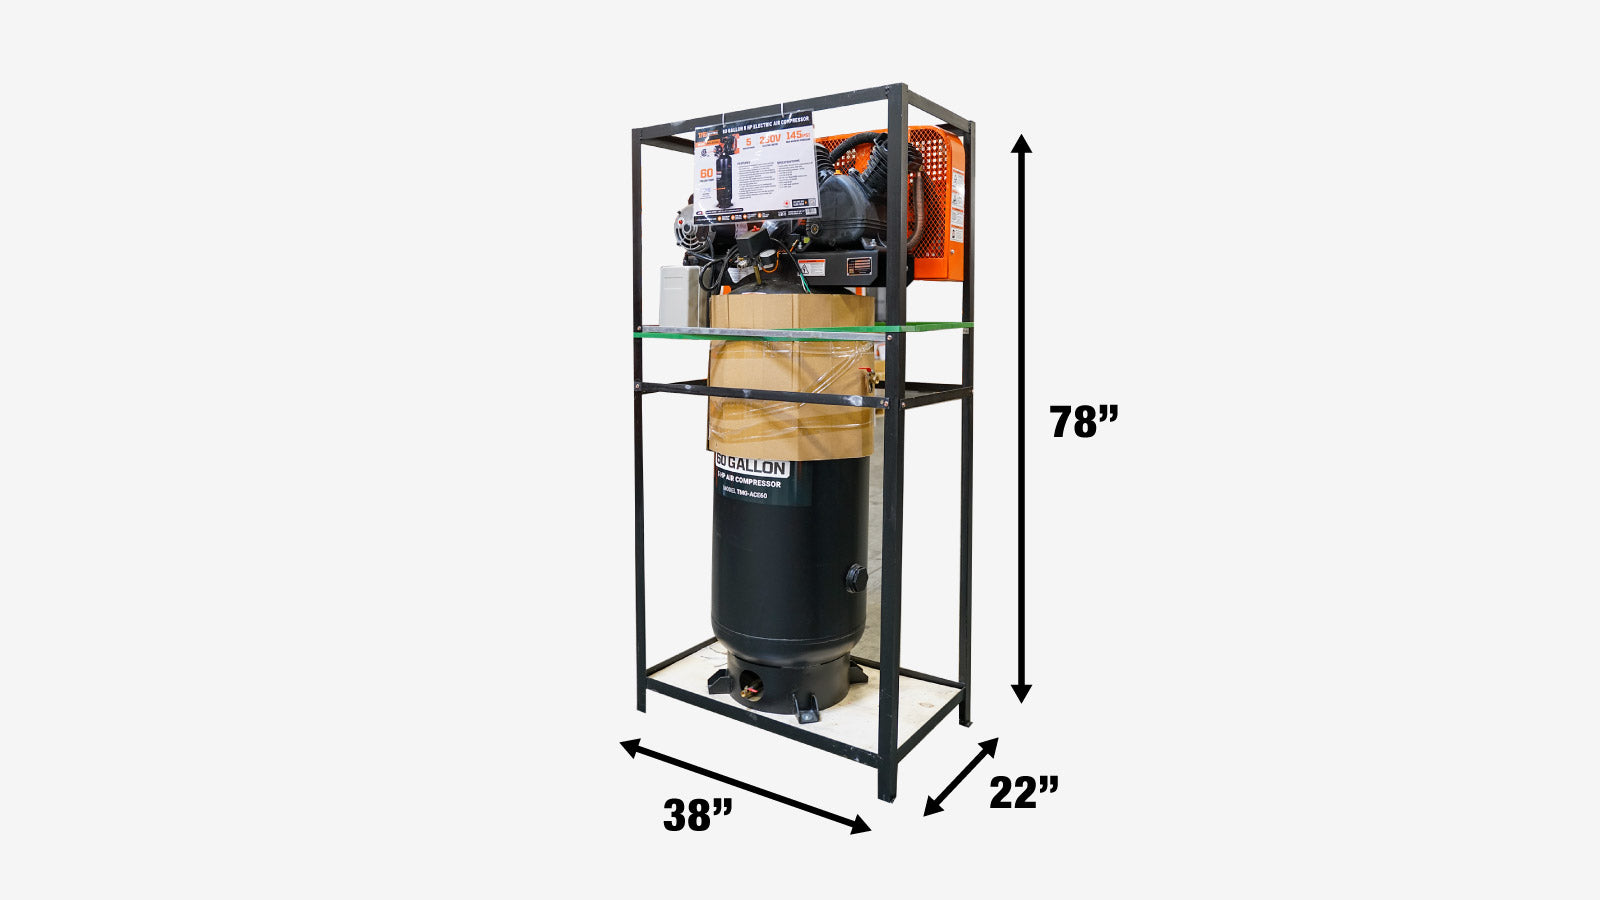 TMG Industrial 60 Gallon 5 HP Stationary Electric Air Compressor, 5 Min Fill Time, 230V Induction Motor, ASME Vertical Tank, TMG-ACE60-shipping-info-image